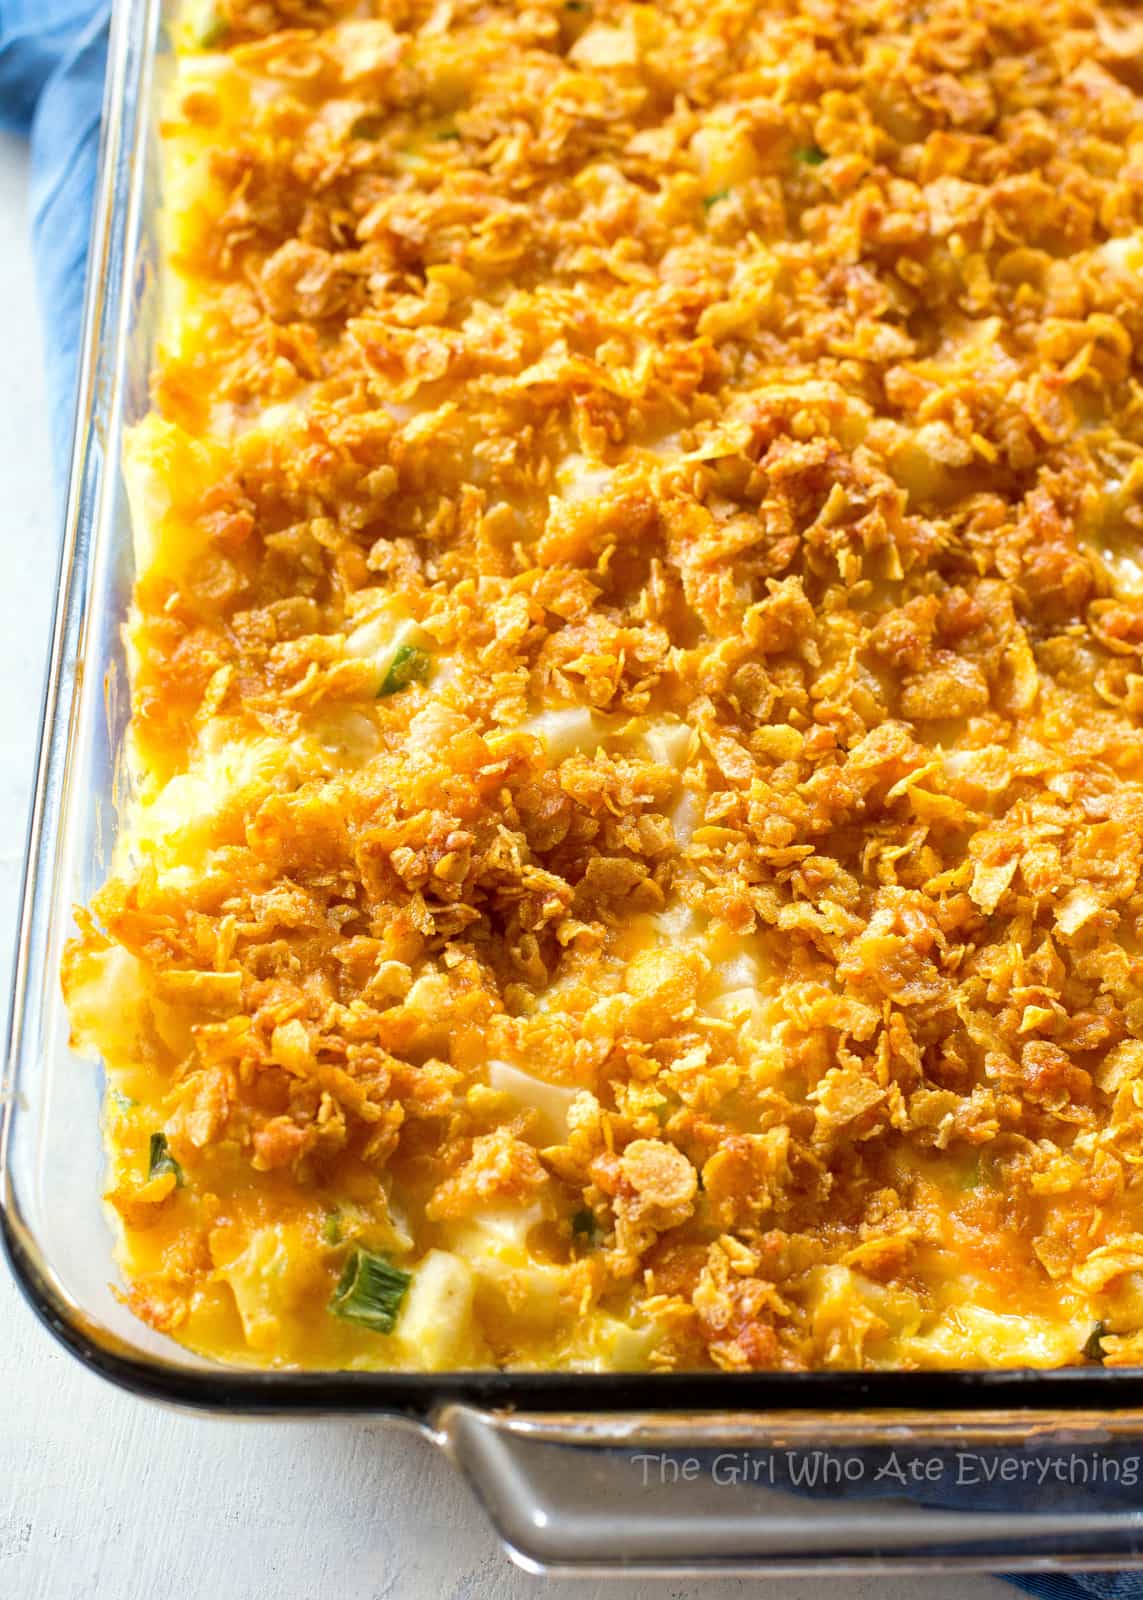 Funeral potatoes in a dish